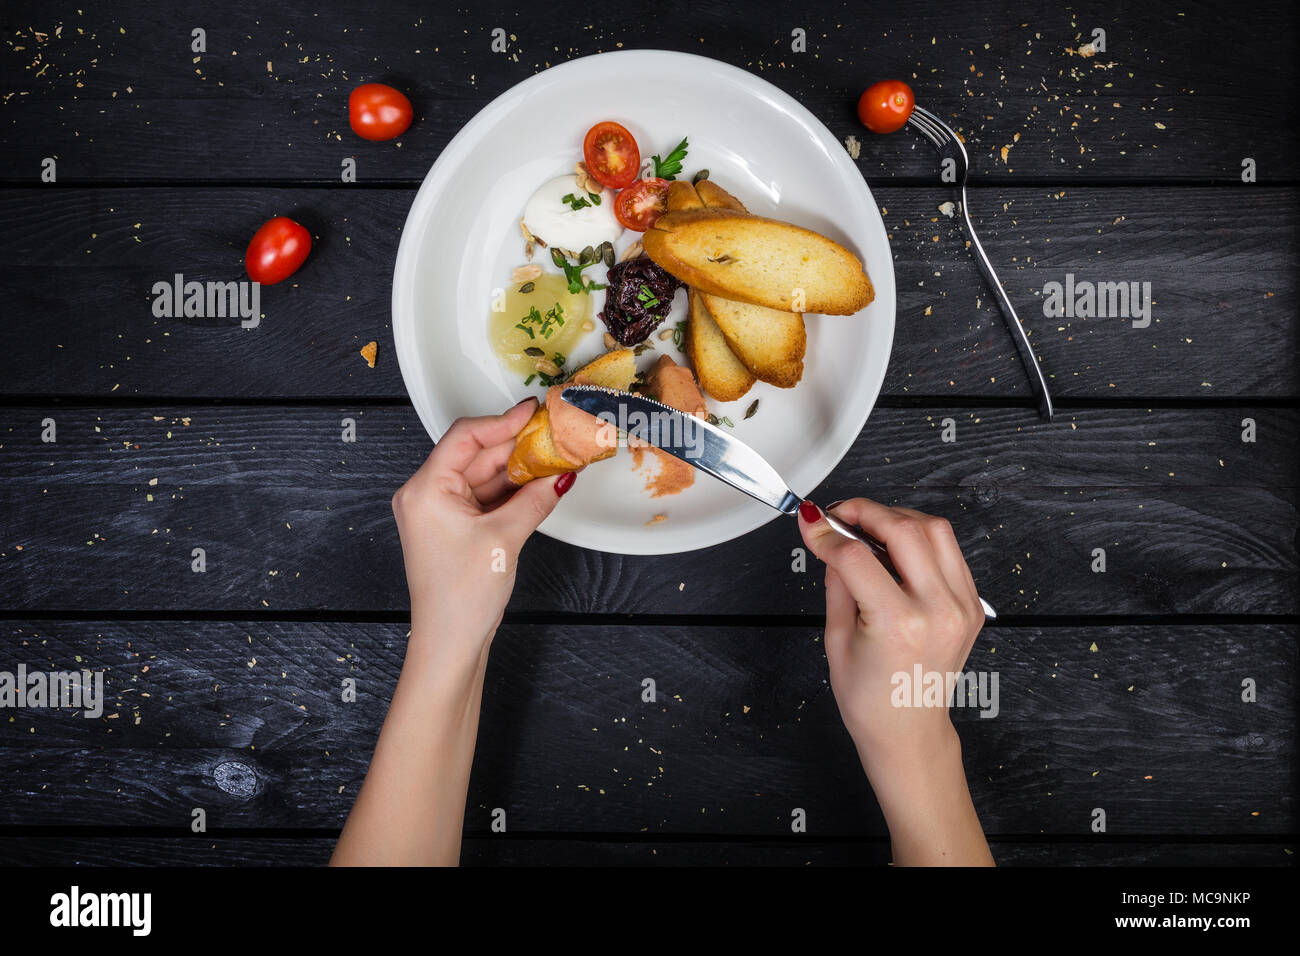 Assorted pates with fried bruschetta served on the white plate with cutlery and hands on the wooden background. Top view. Stock Photo